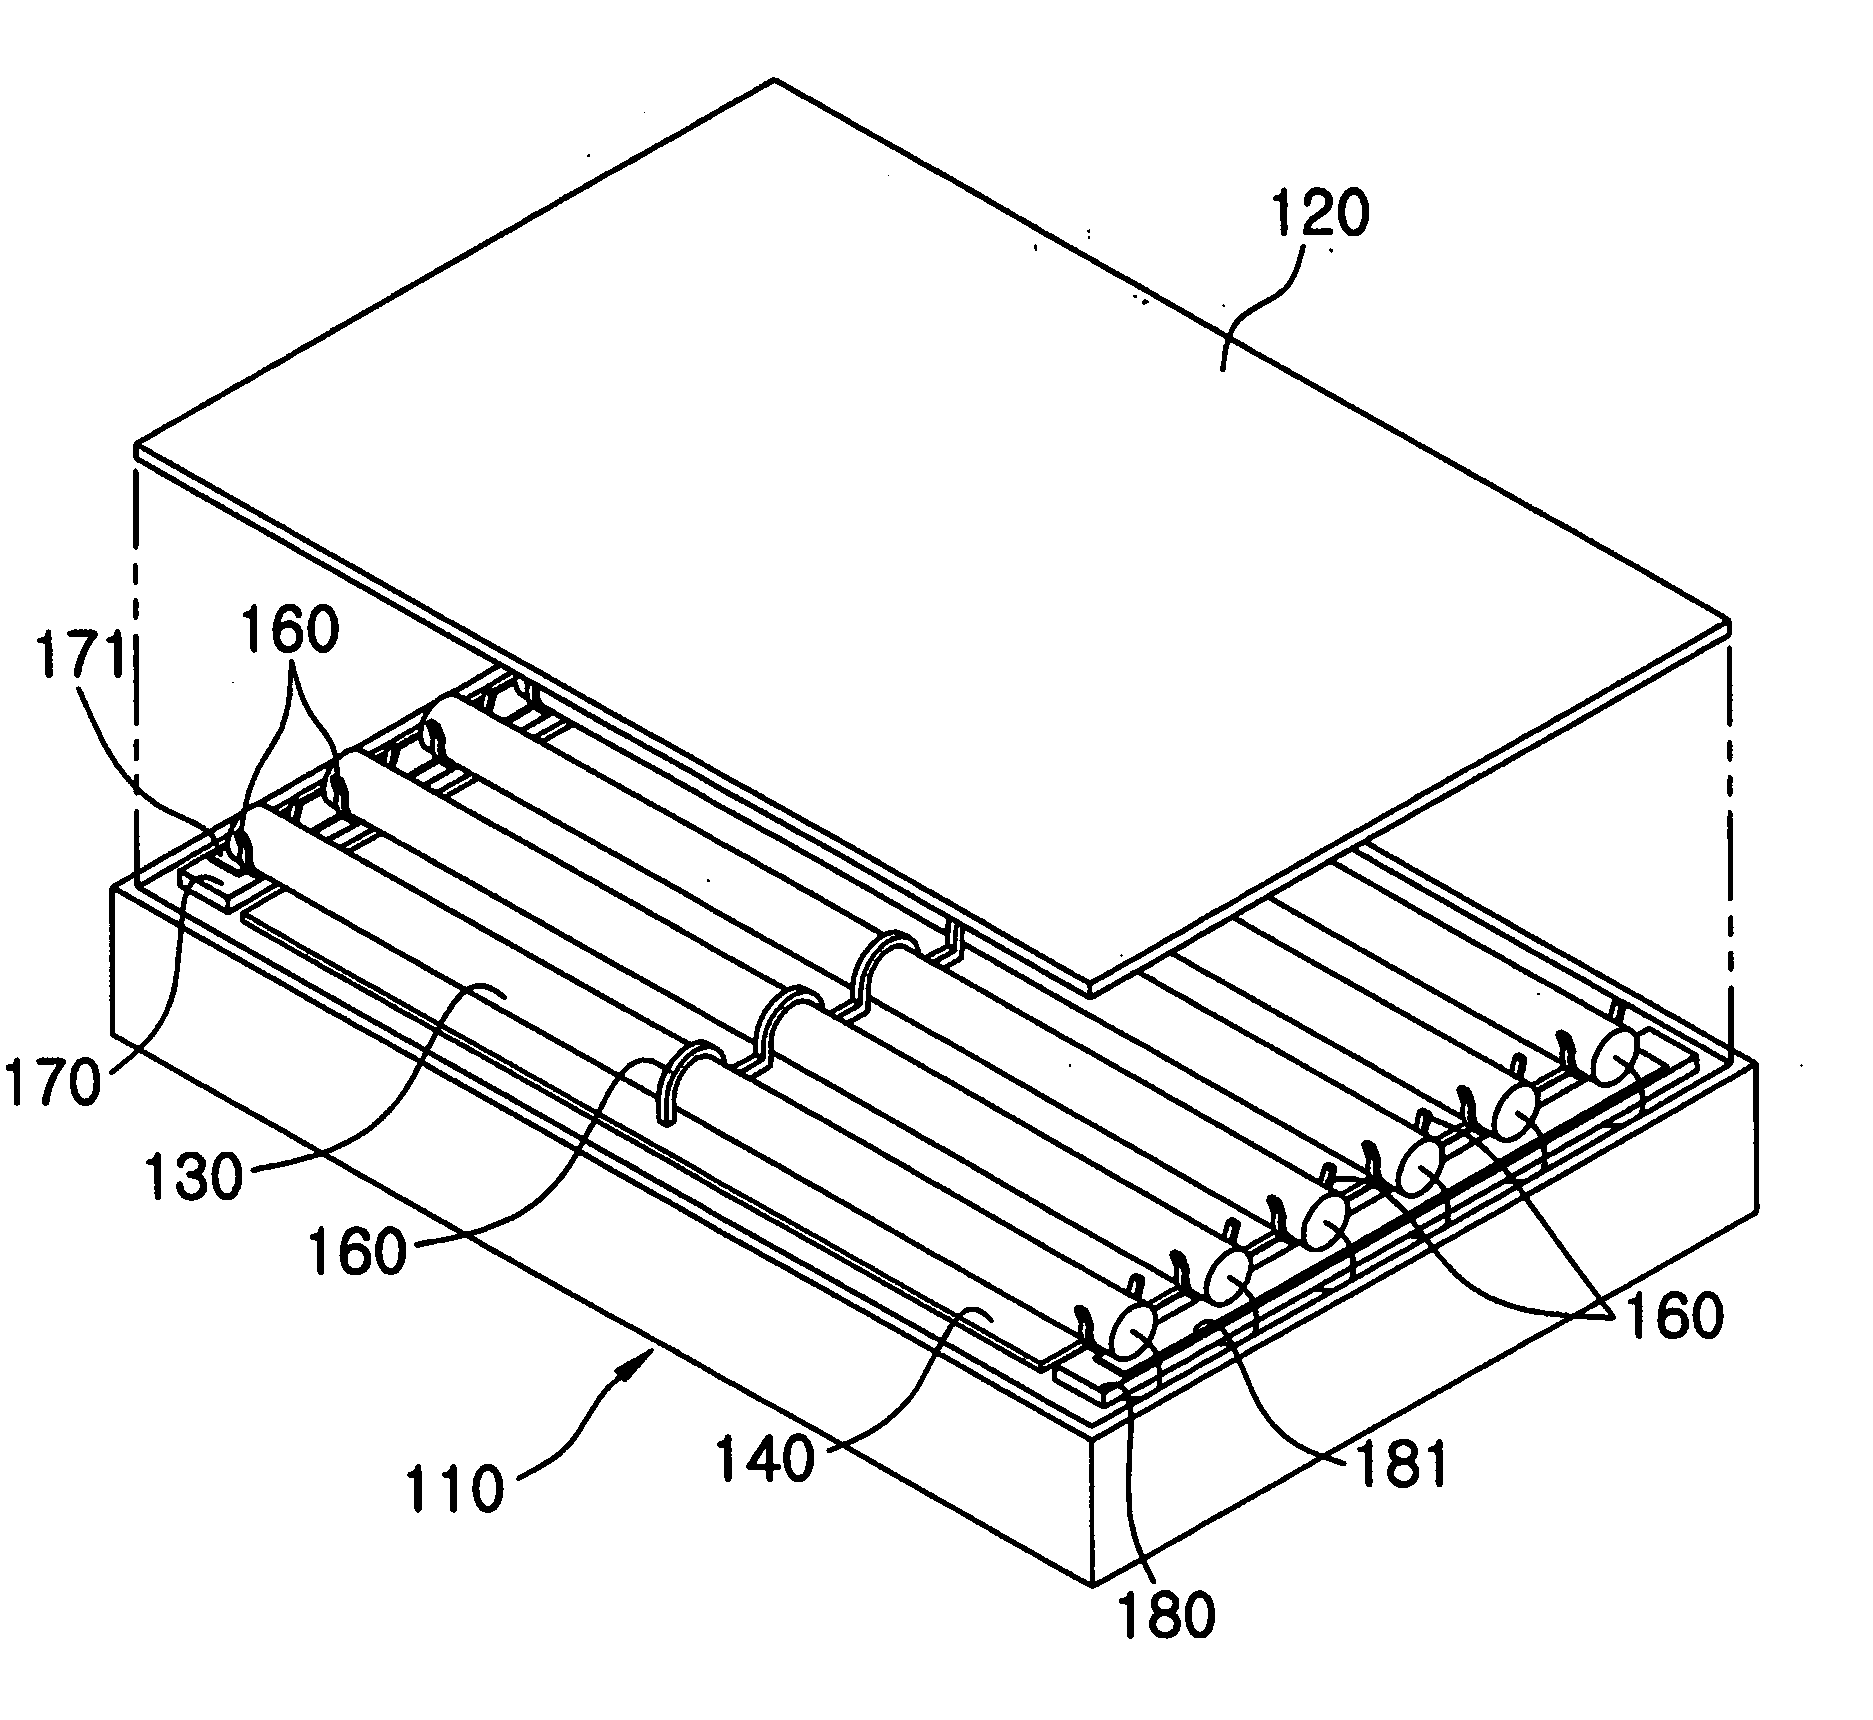 Direct-type back light device